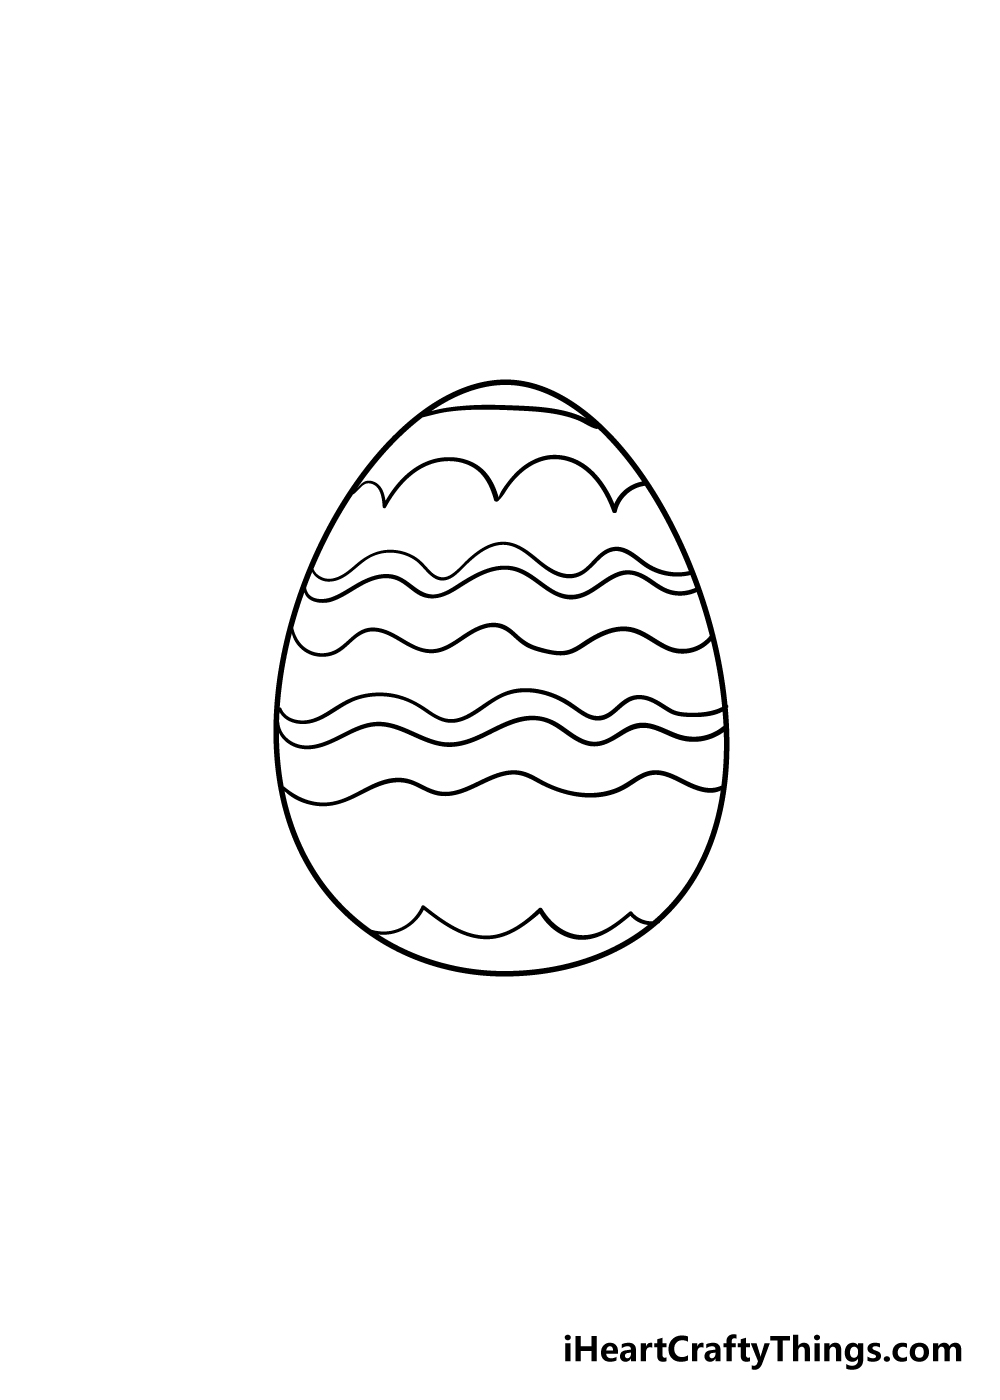 Easter egg drawing step 4